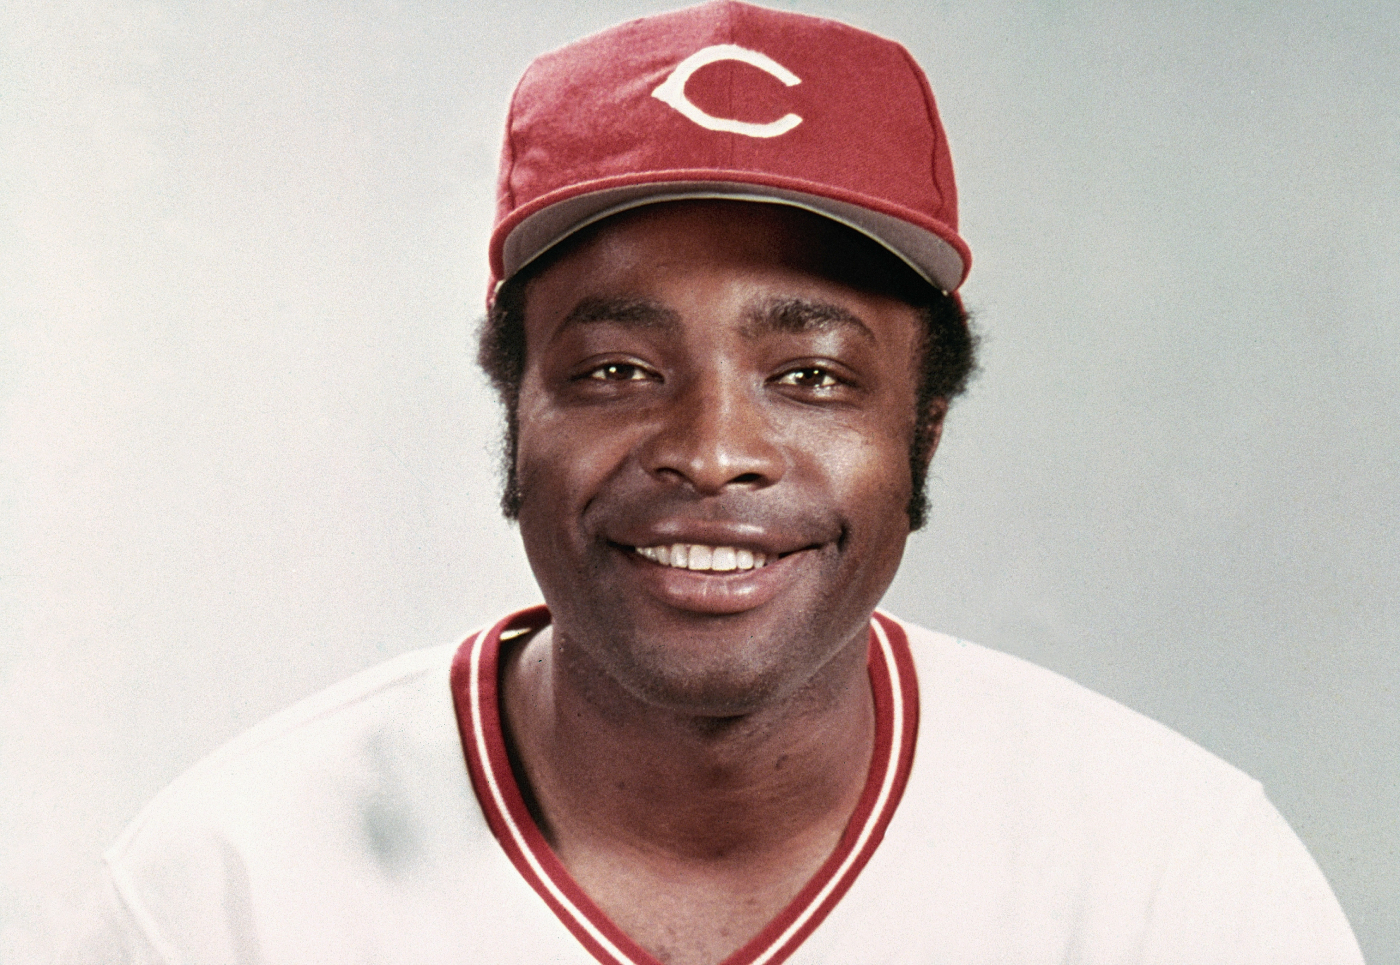 Joe Morgan was a legend for the Cincinnati Reds. He sadly died, though, on Oct. 11, 2020. So, what was Morgan's net worth?